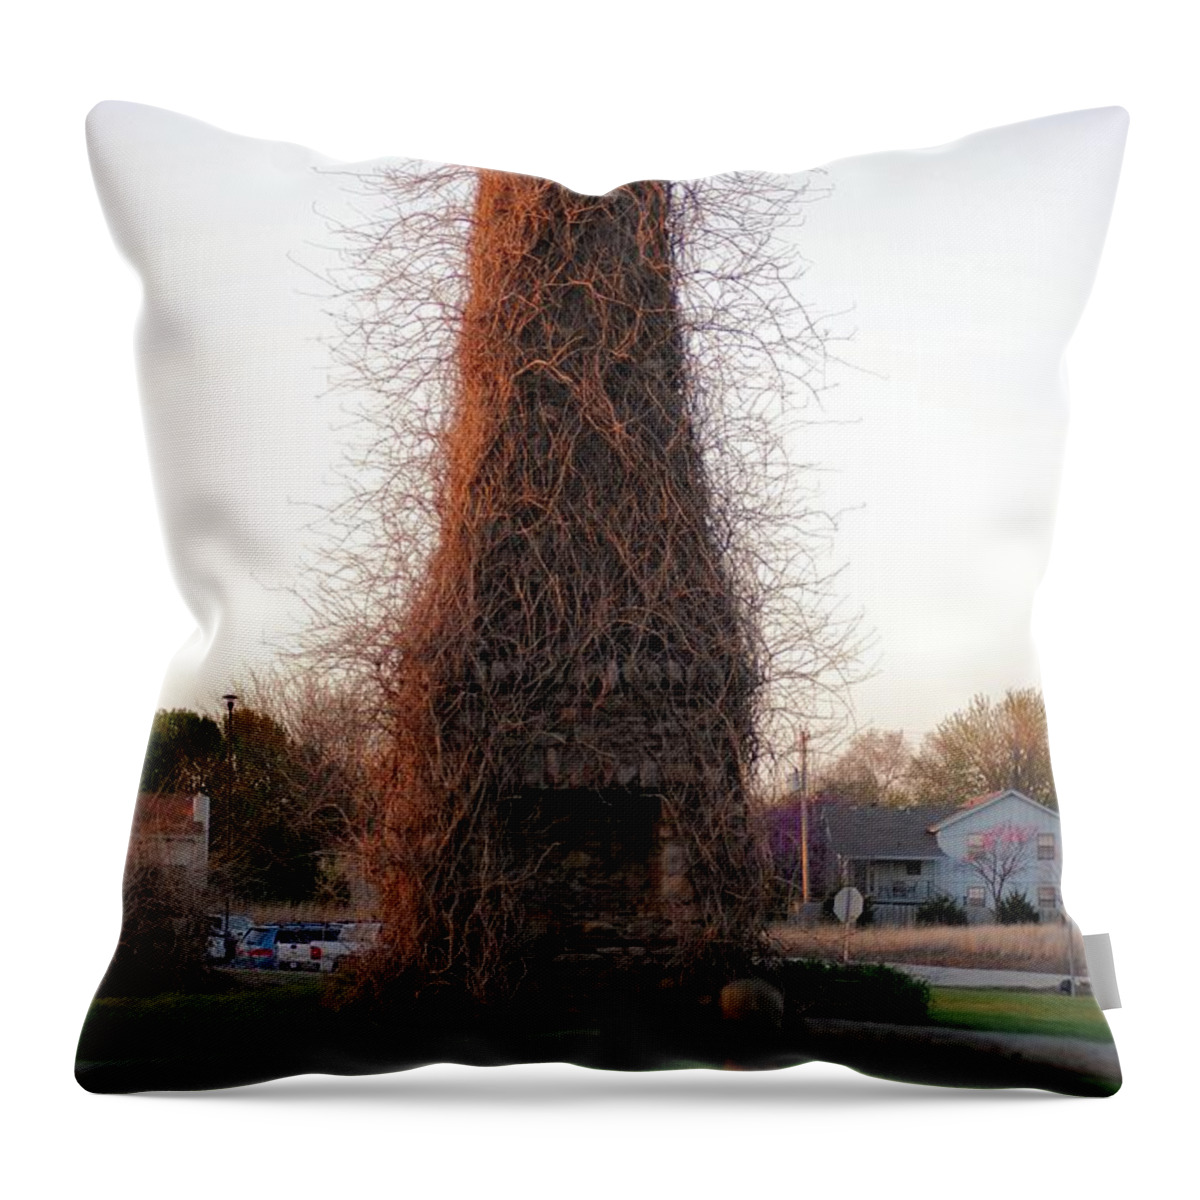 Texture Throw Pillow featuring the photograph Hairy Chimney by Mark McReynolds